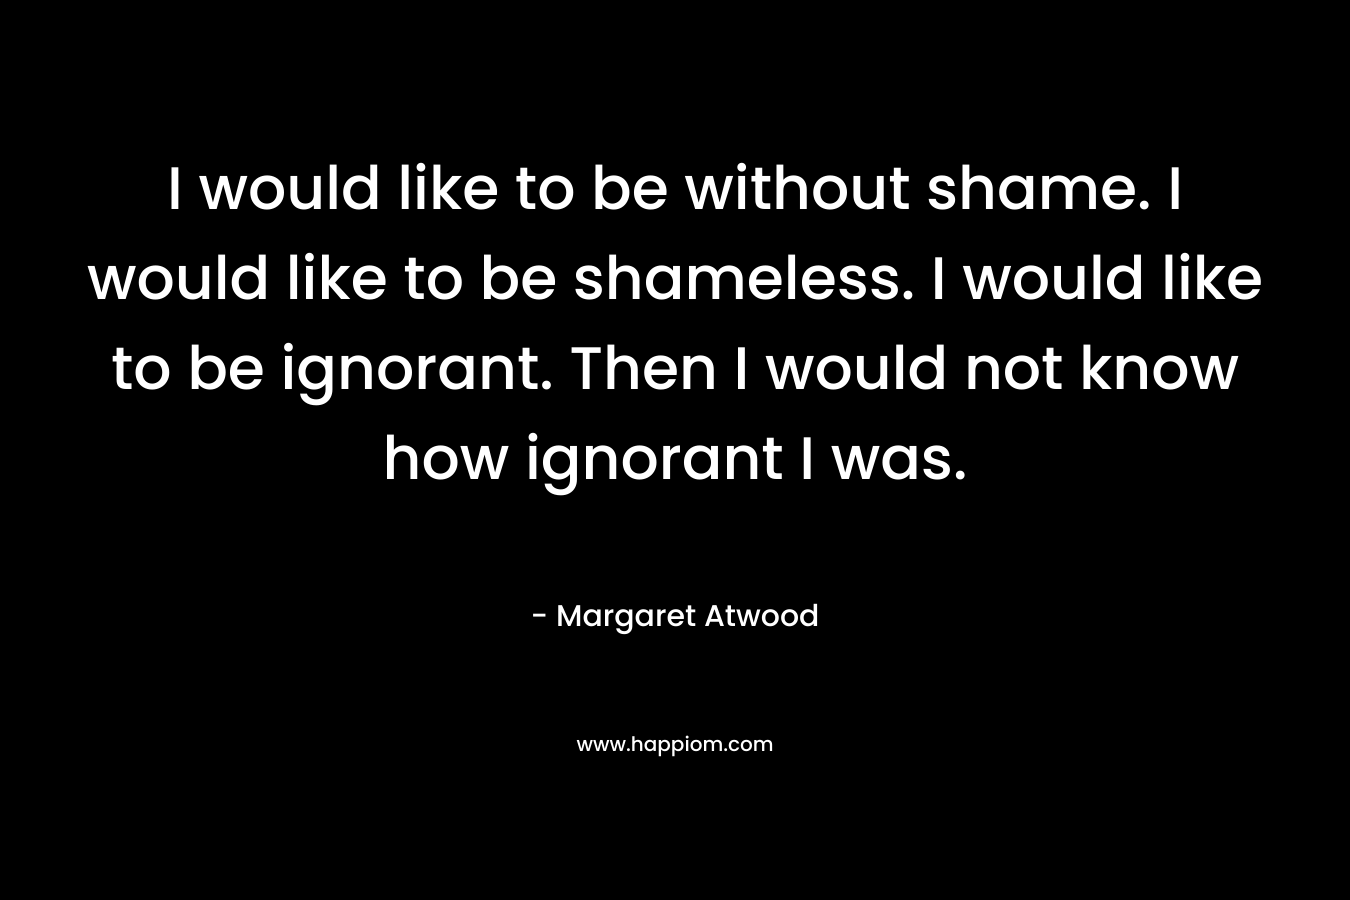 I would like to be without shame. I would like to be shameless. I would like to be ignorant. Then I would not know how ignorant I was.